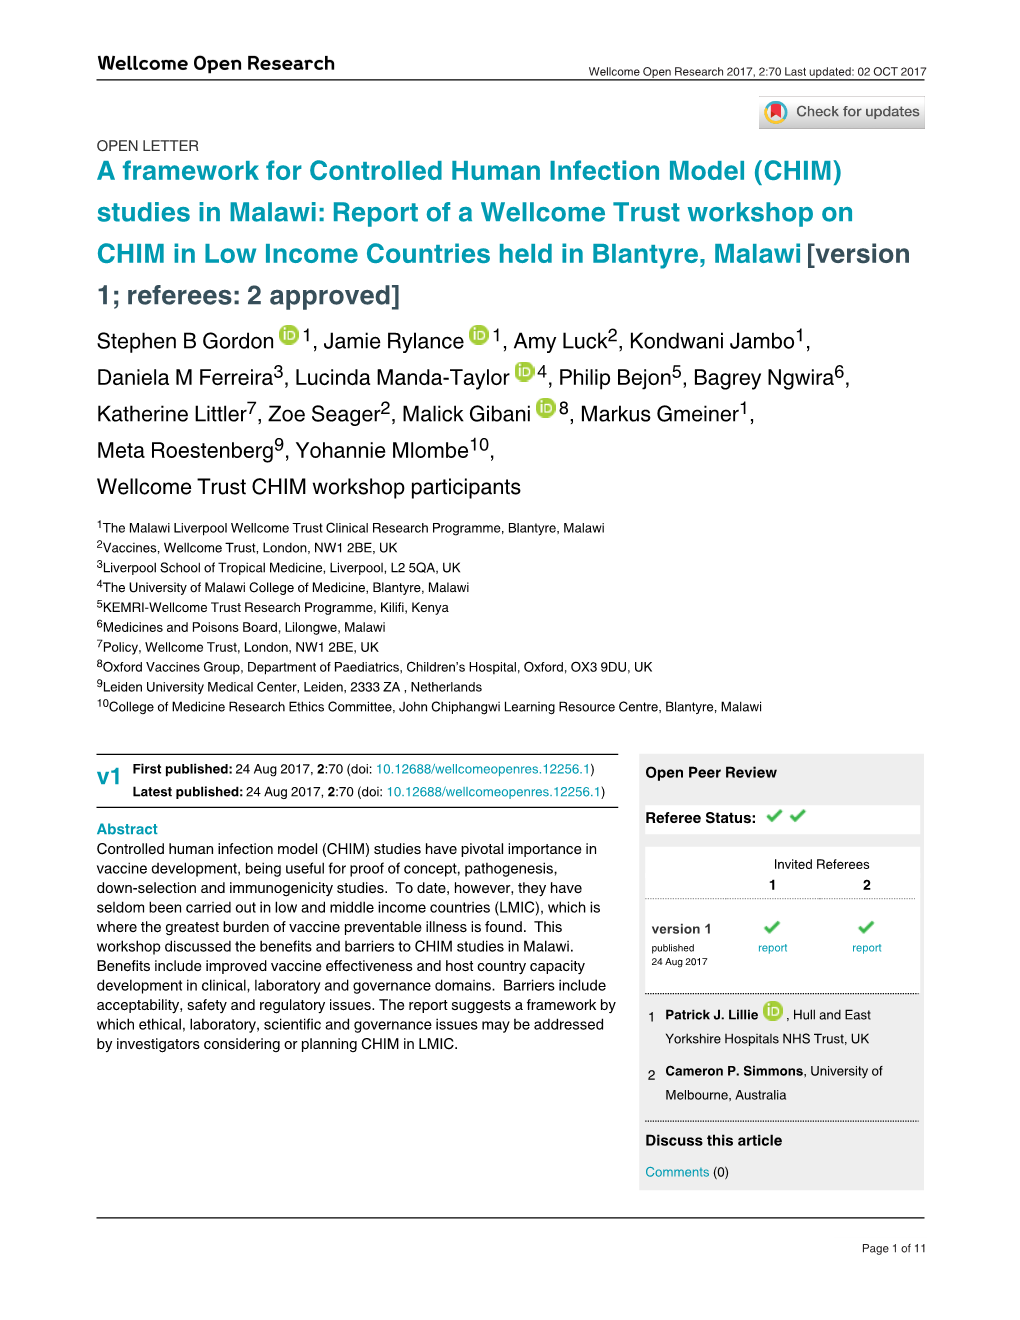 A Framework for Controlled Human Infection Model (CHIM) Studies in Malawi: Report of a Wellcome Trust Workshop On